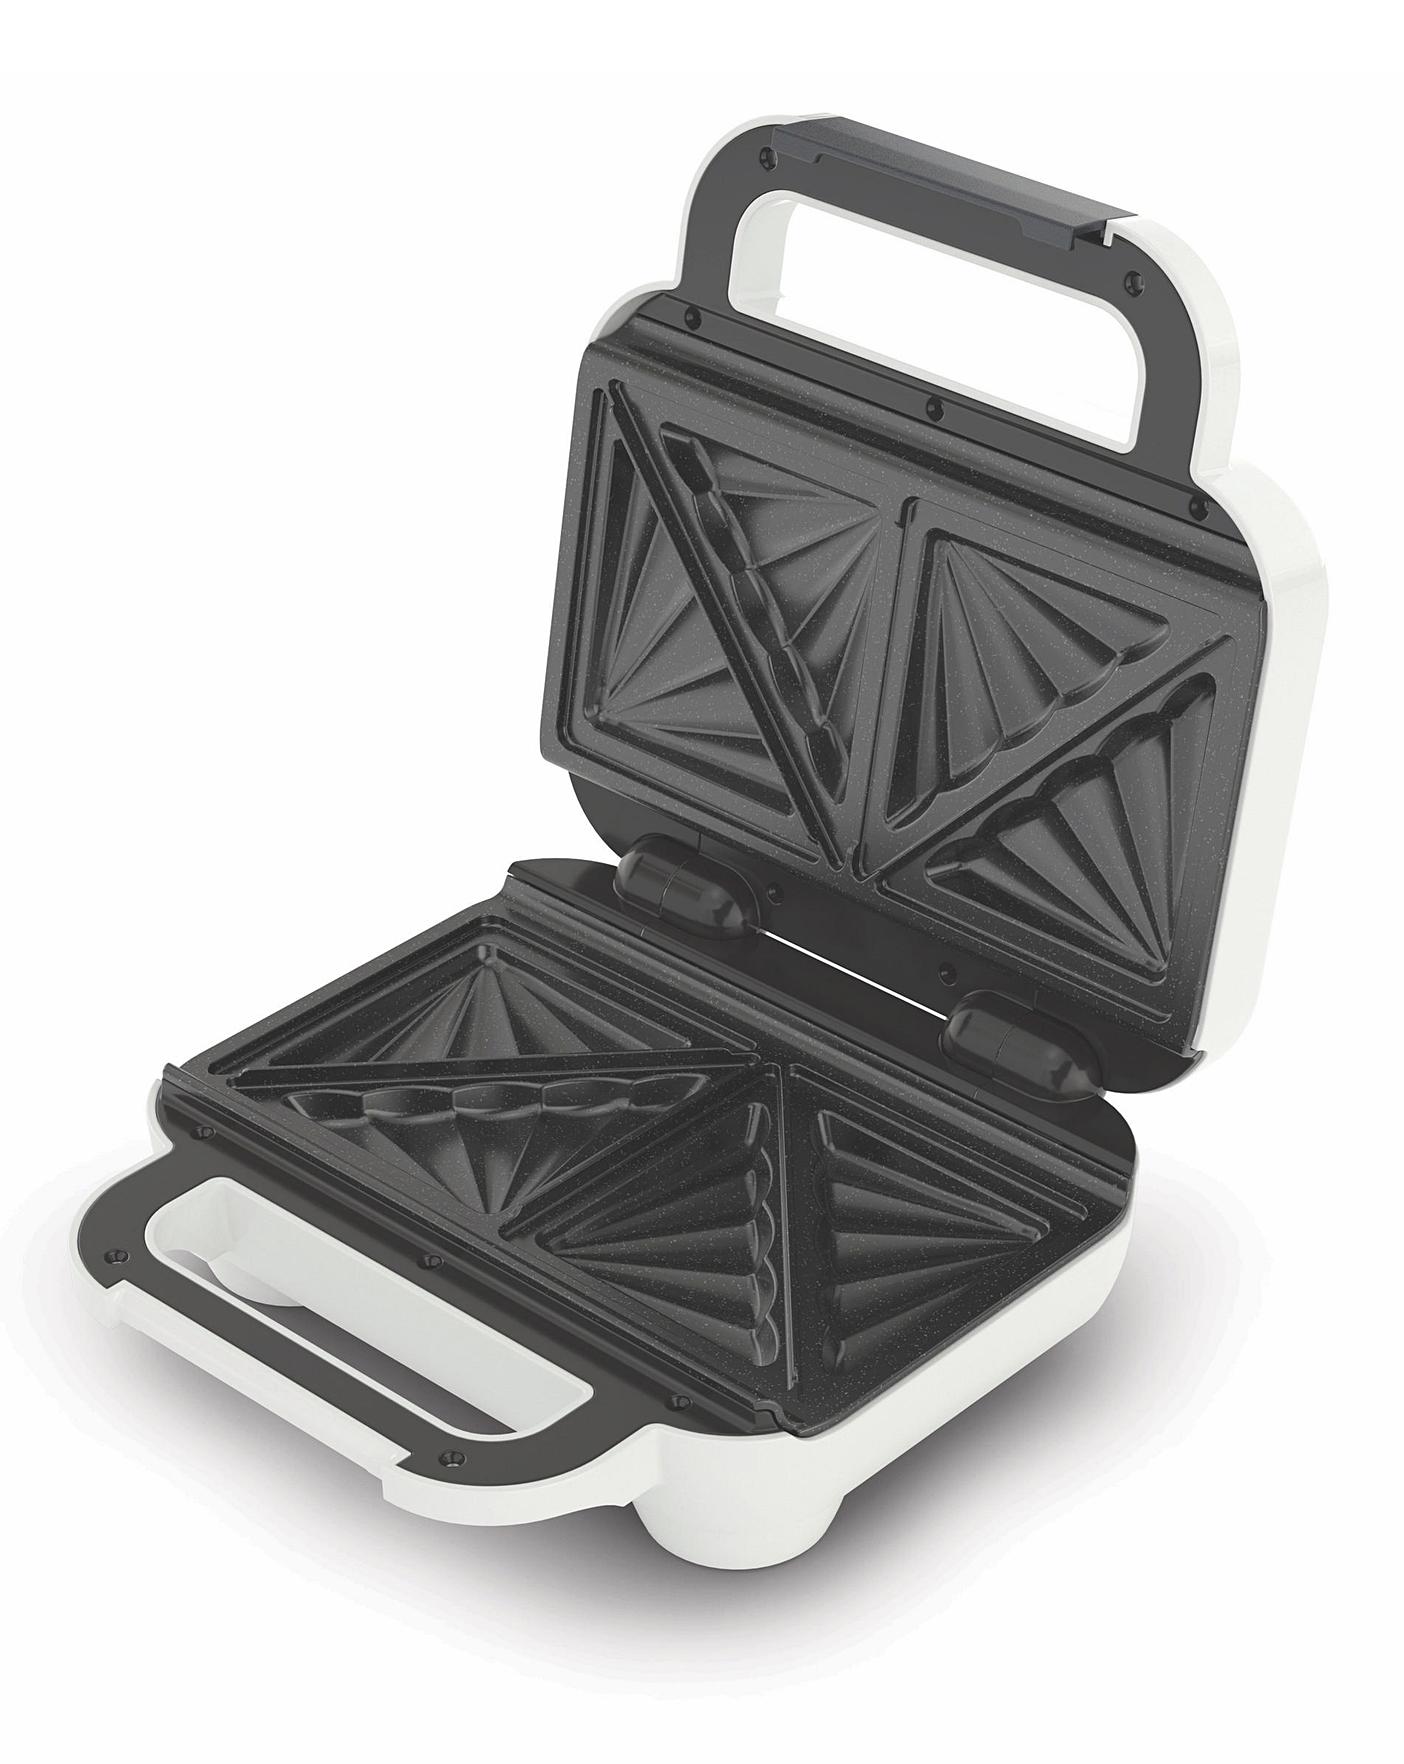 The Breville Ultimate Deep Fill Toastie Maker is currently the